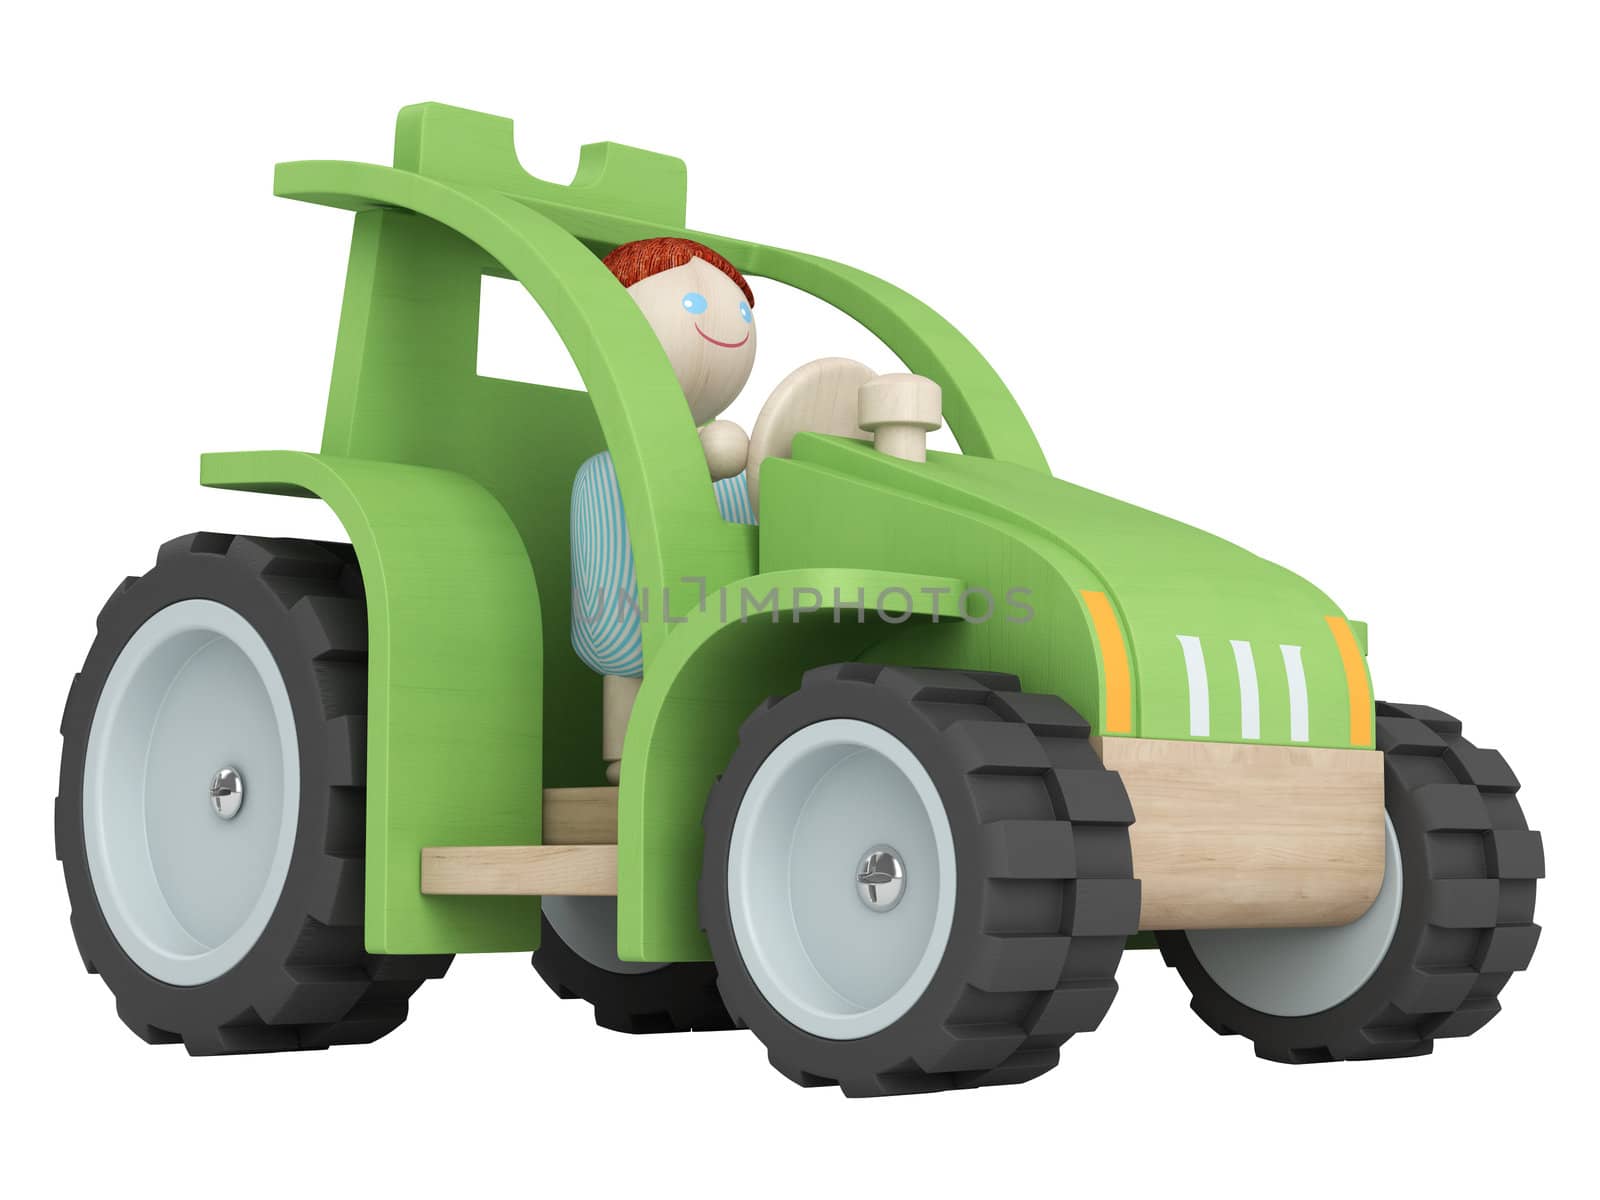 Toy farmer driving his green tractor as he goes about the work on the farm isolated on white